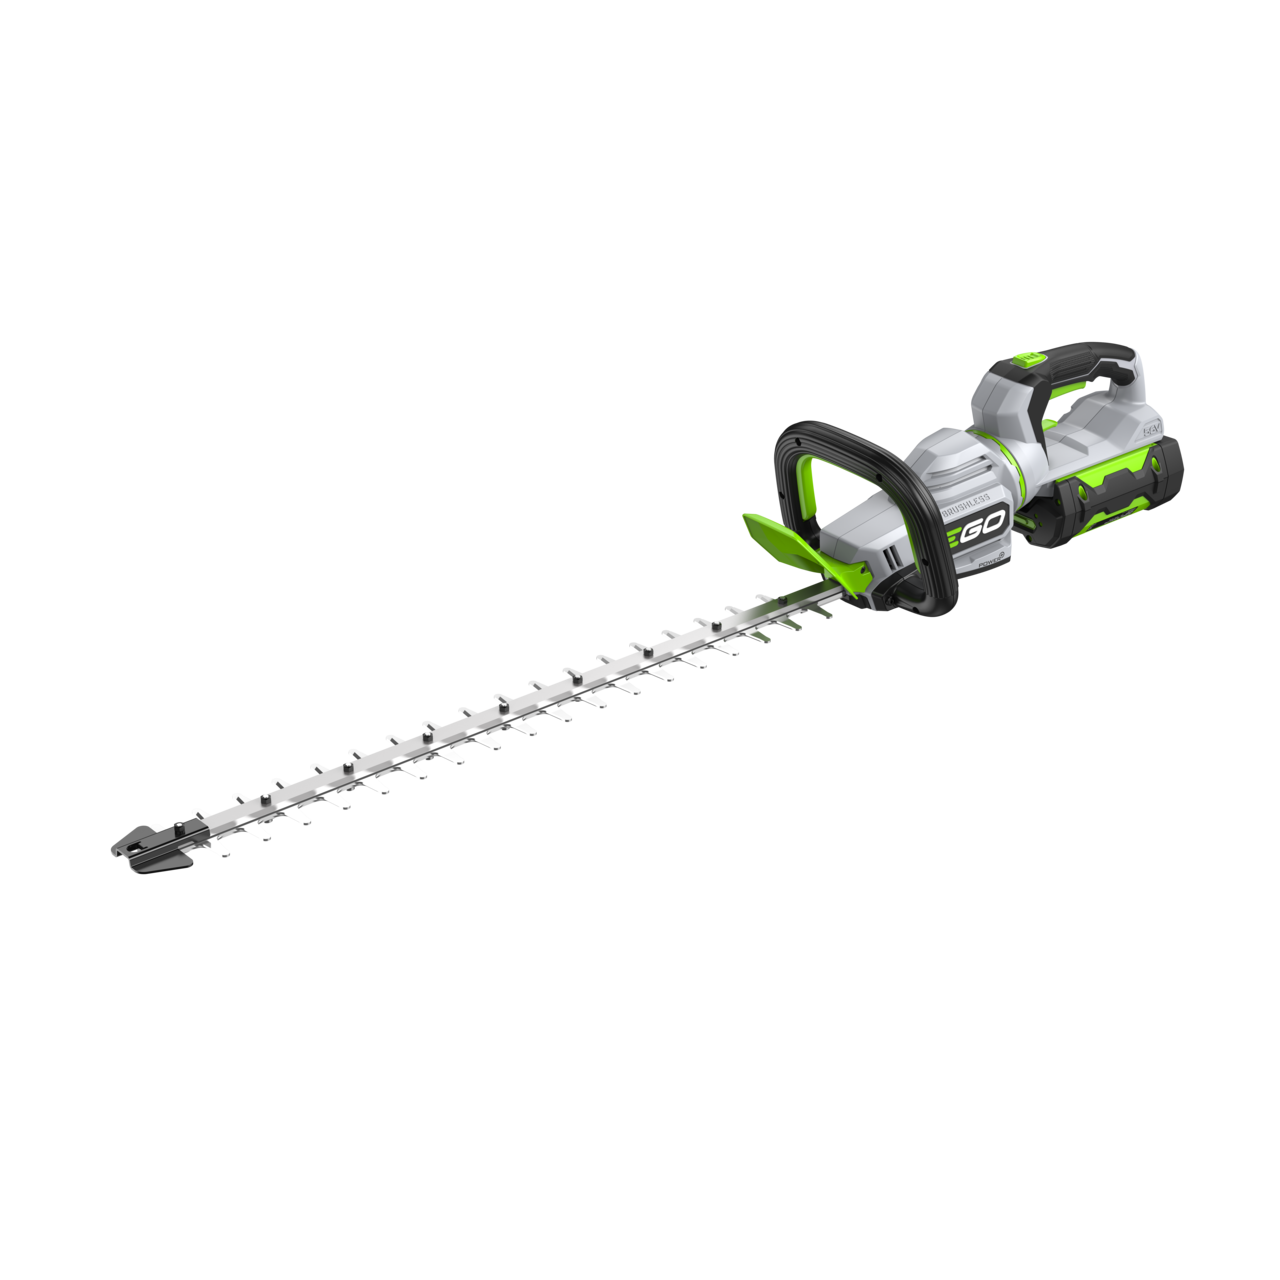 Image of Ego HT2601E 66cm Cordless Hedge Trimmer (With 2.5 Ah Battery & Standard Charger)